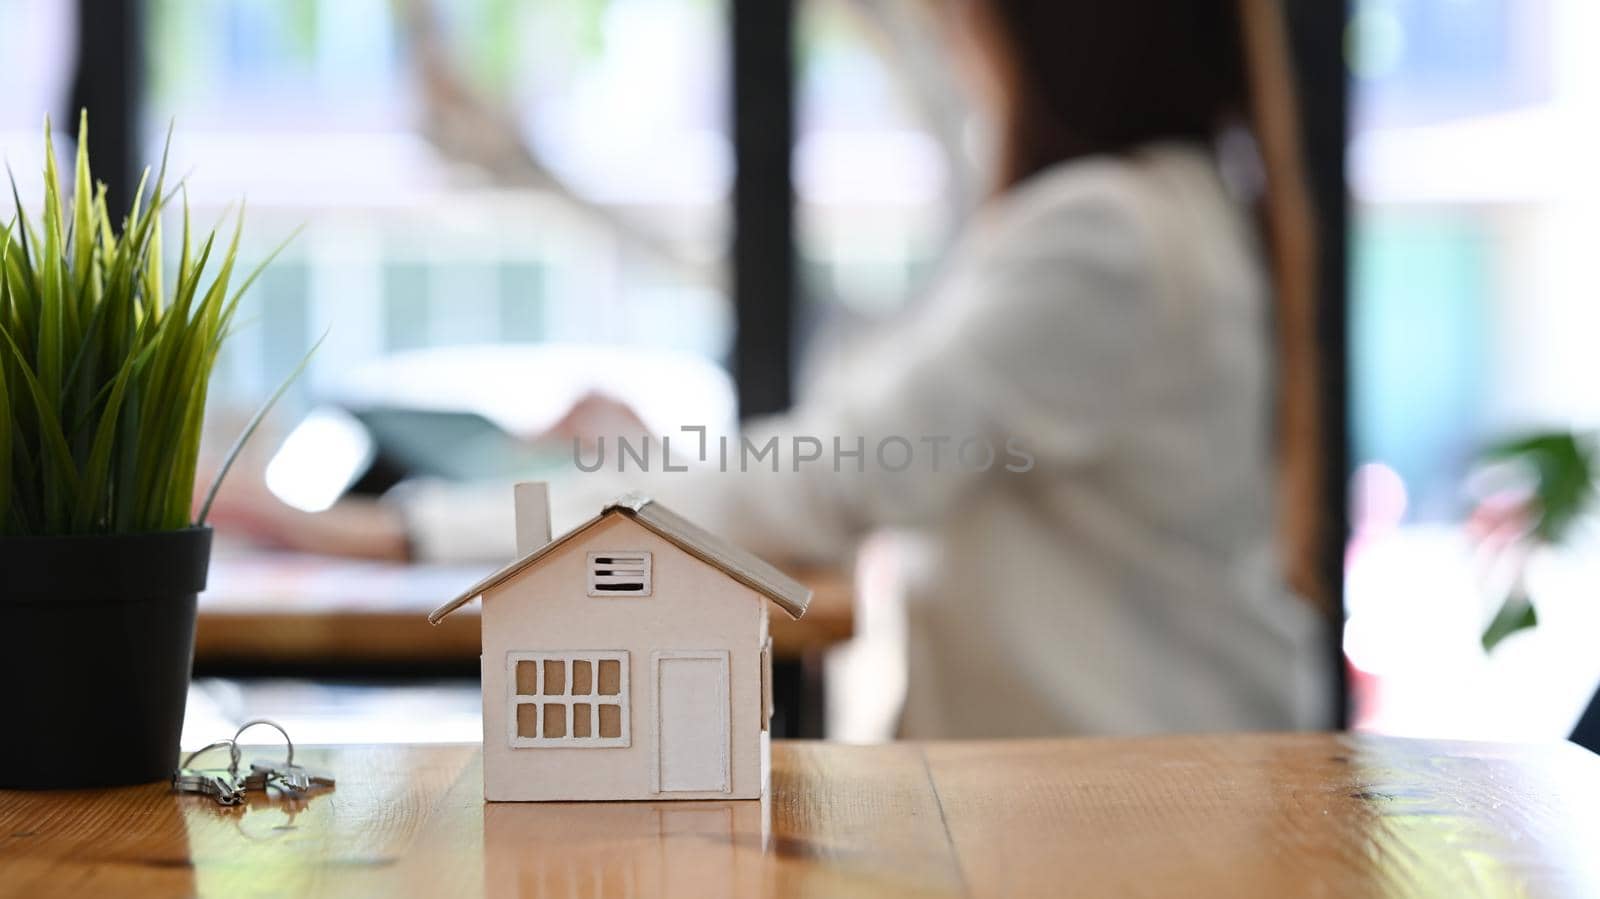 Small house model, keys and houseplant on wooden table. Real estate investment concept. by prathanchorruangsak